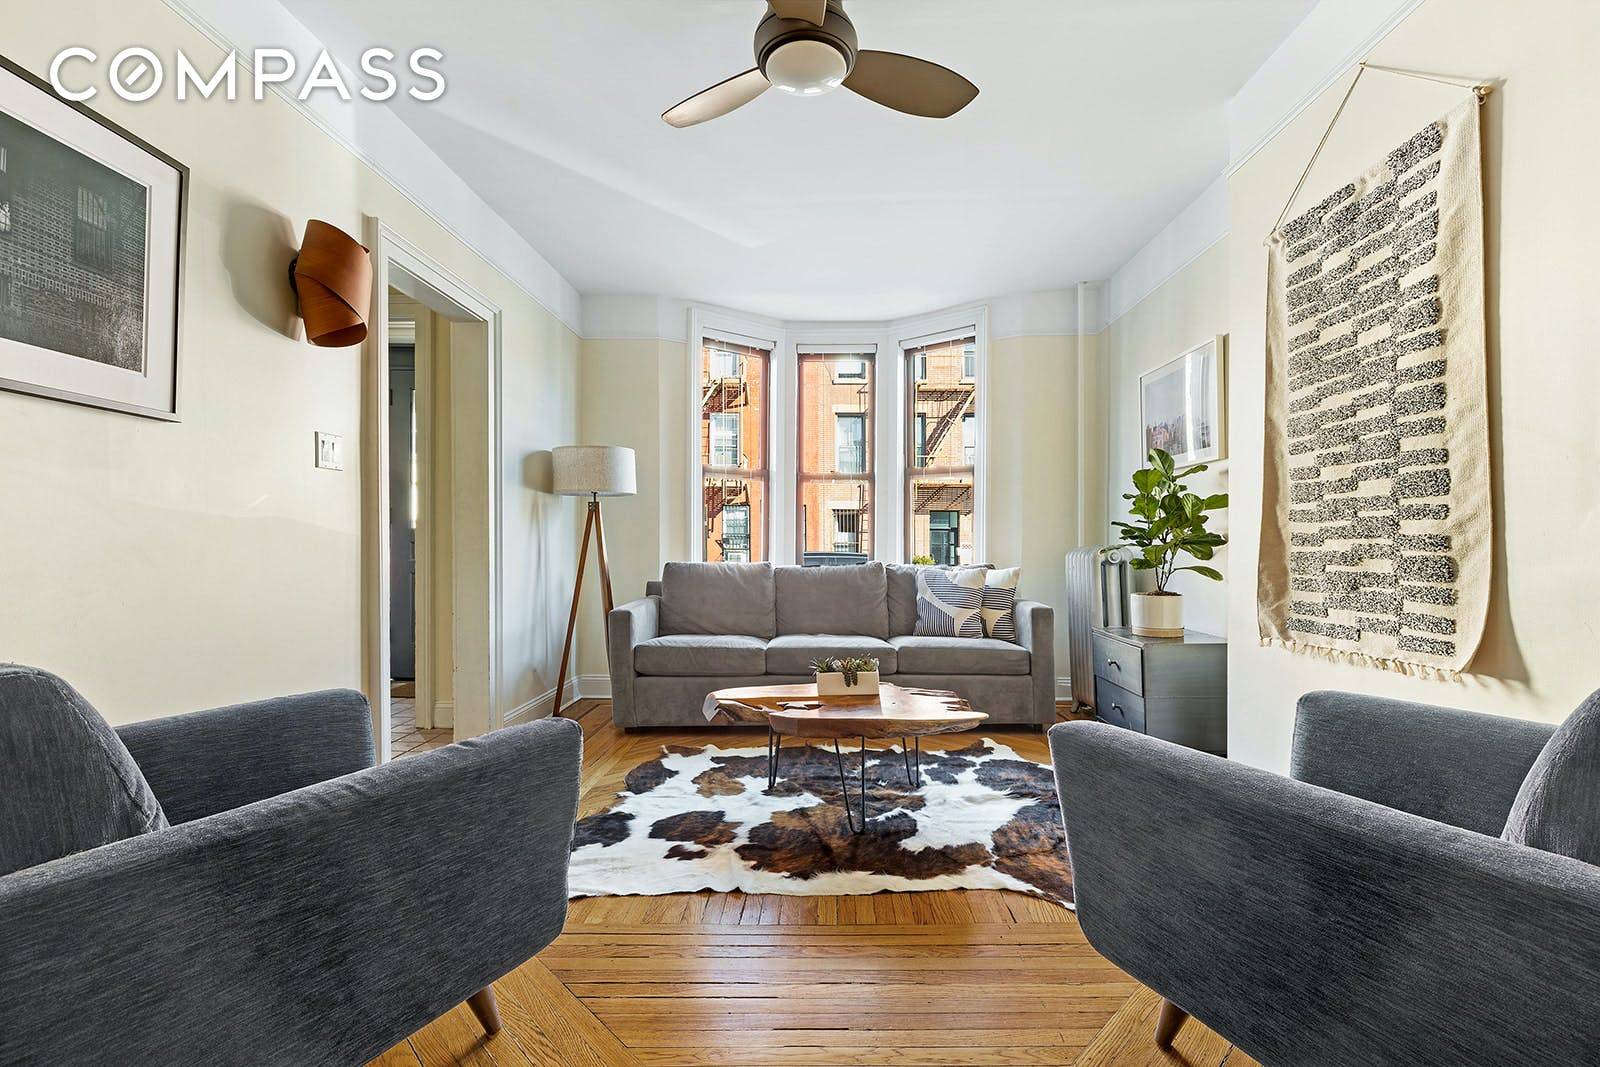 Tastefully updated and well maintained, this charming Windsor Terrace townhouse is ready for you to call home.